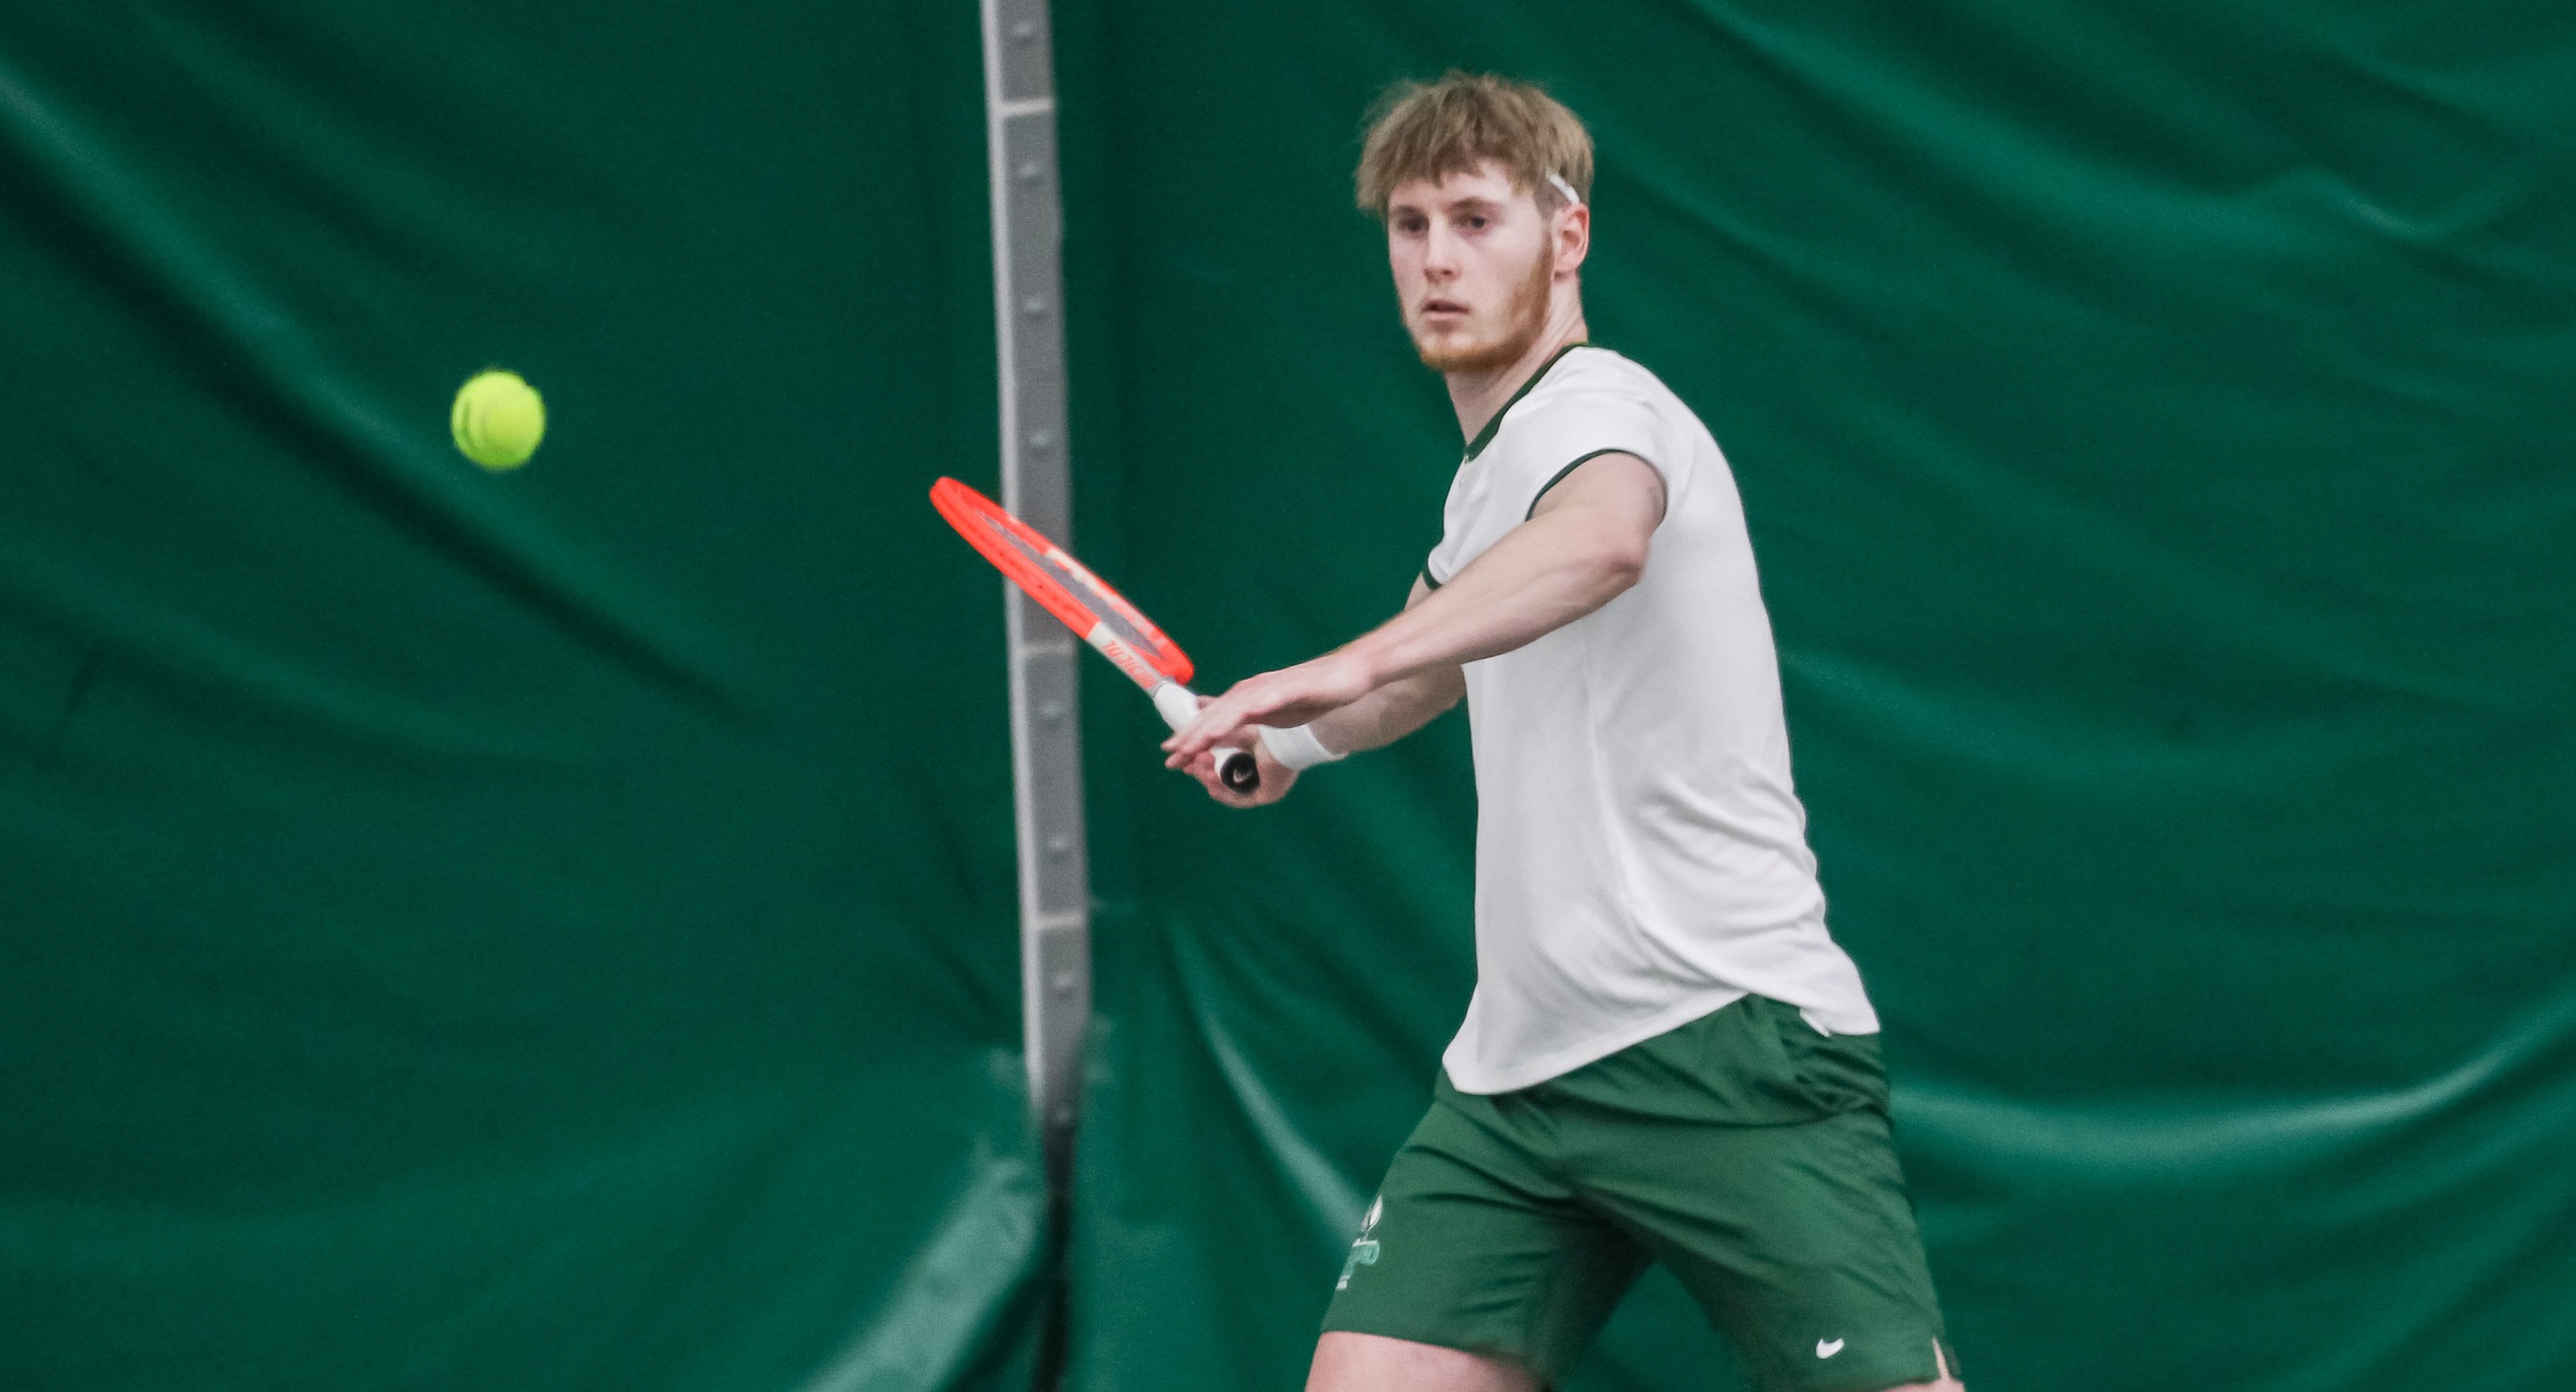 Cleveland State Men’s Tennis Earns Second Straight Sweep With 7-0 Win At UIC